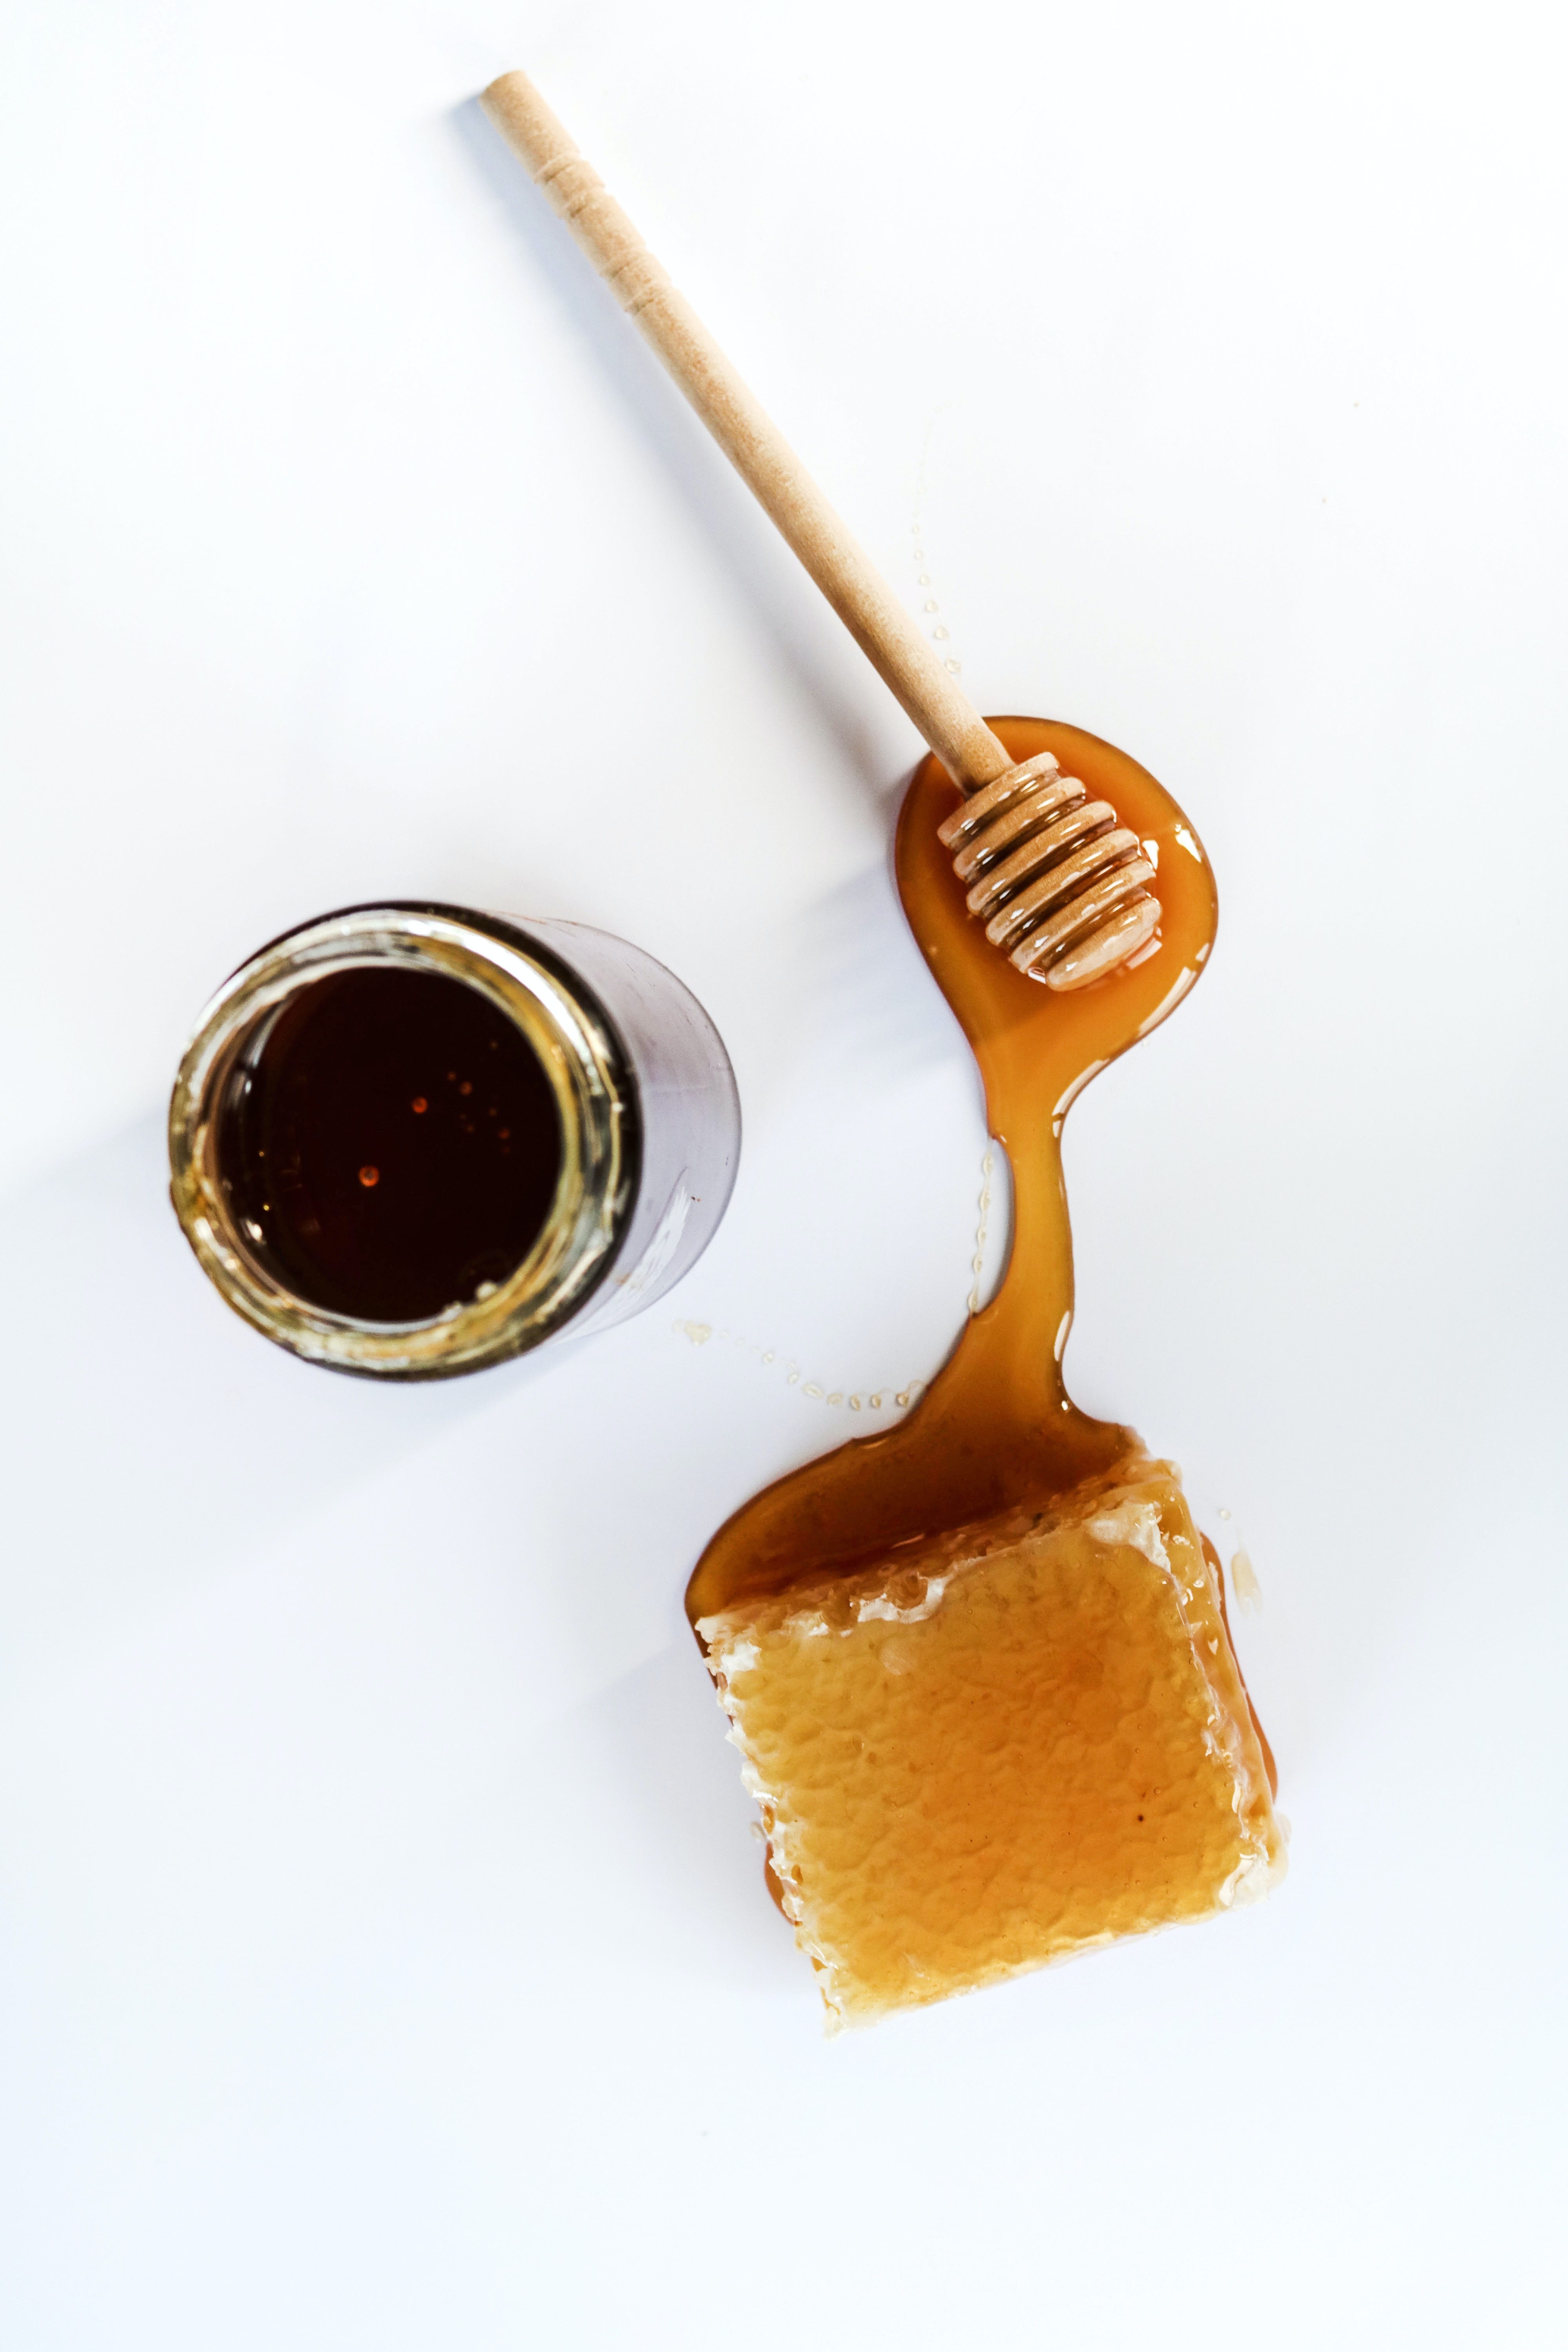 Honey poured onto a white surface